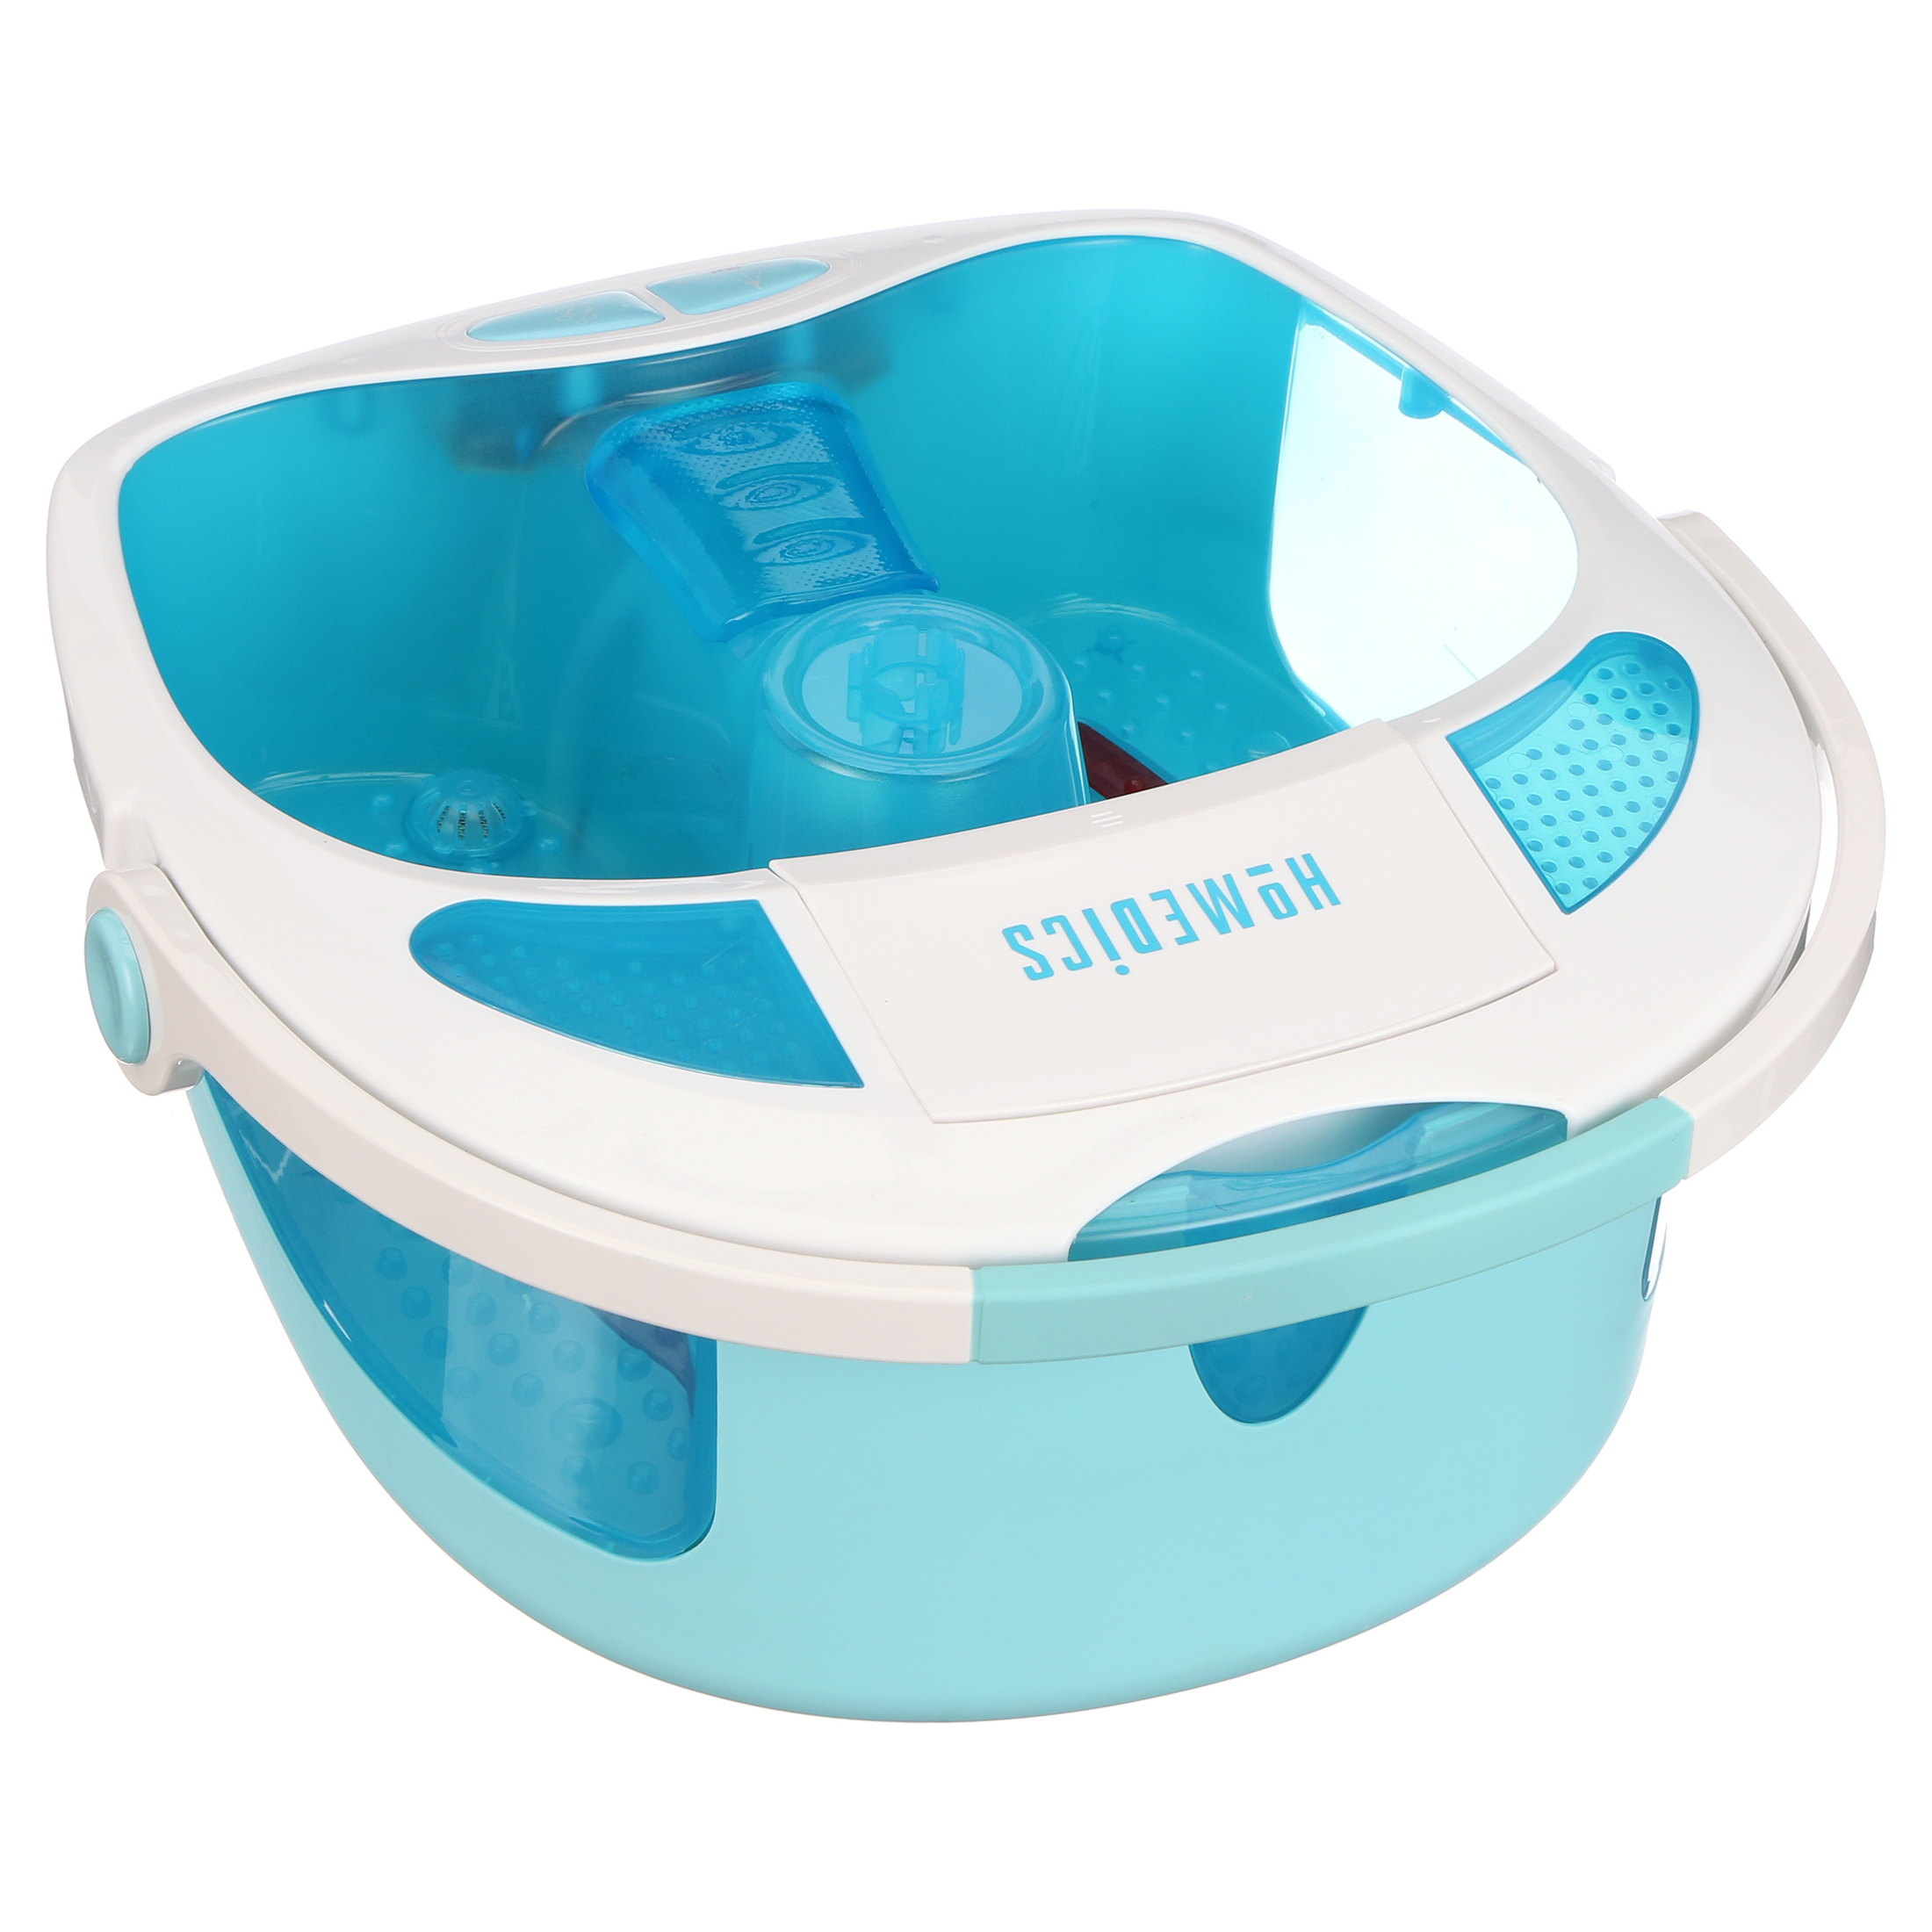 Homedics Shower Bliss Footspa with Massaging Water Jets, 3 Attachments and Toe-Touch Controls, FB-625 - image 2 of 18